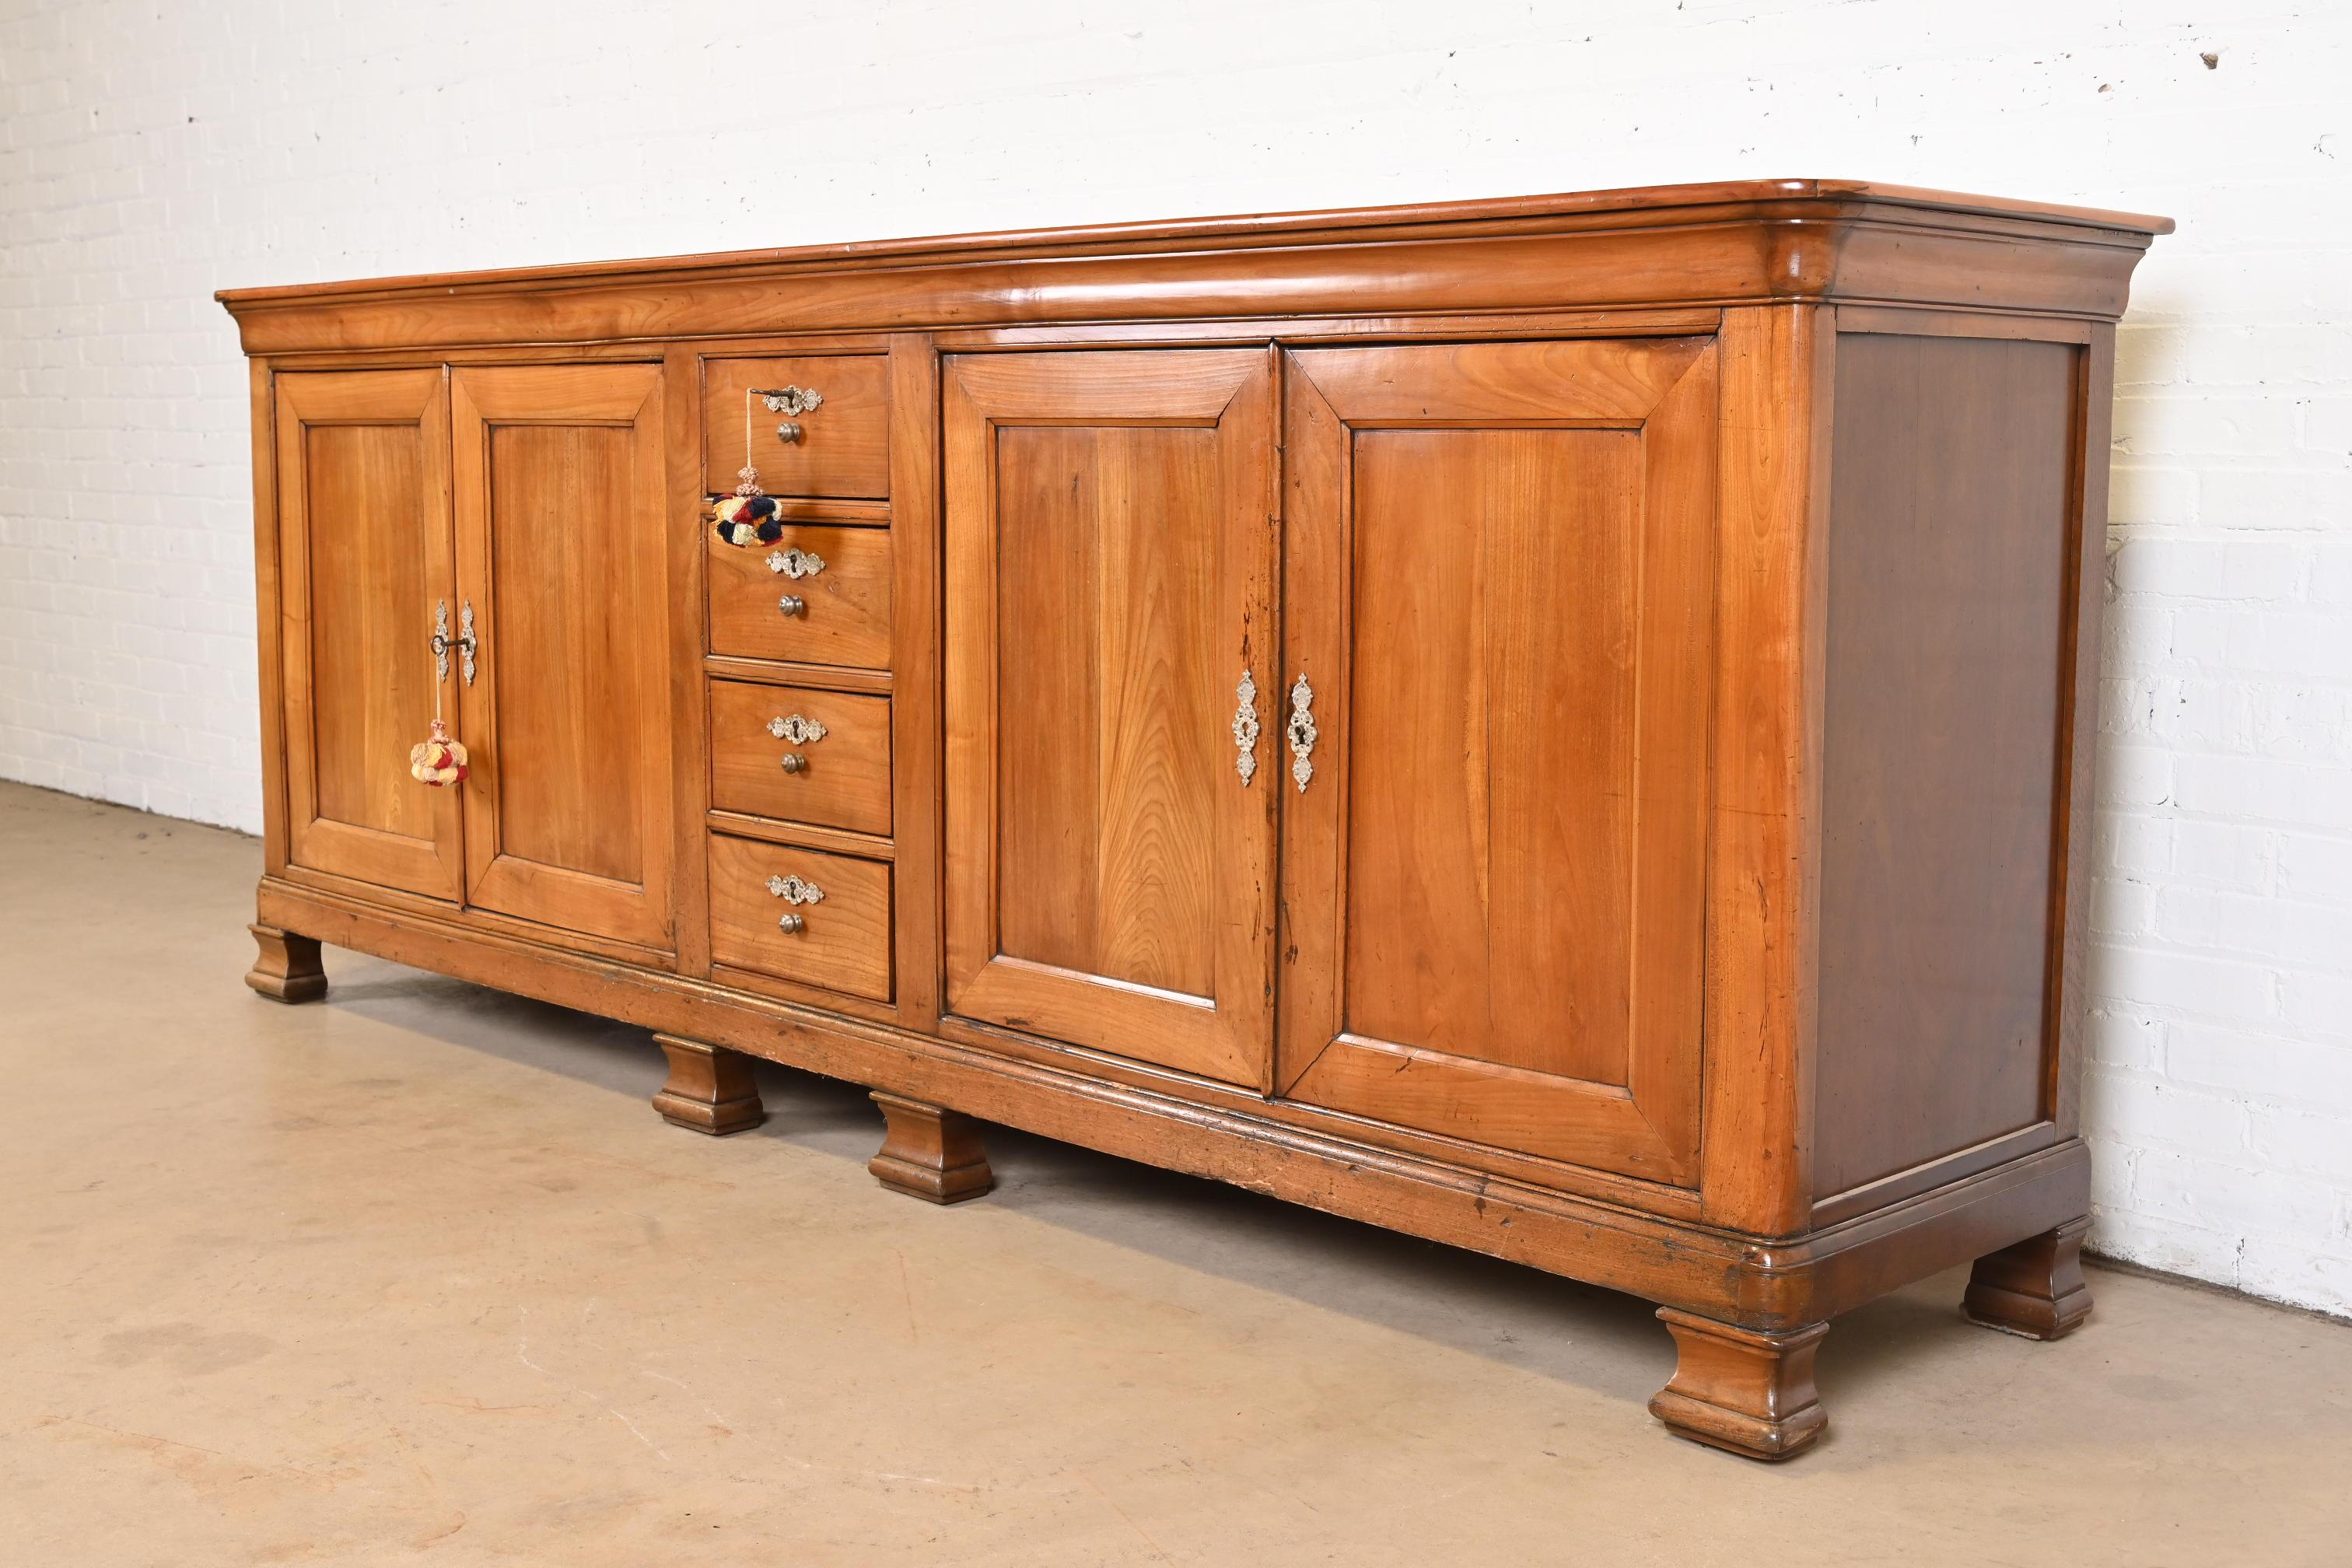 A gorgeous monumental French Provincial or Louis Philippe sideboard buffet, credenza, or bar cabinet

France, late 19th century

Carved walnut, with original brass hardware. Cabinets and drawers lock, and two keys are included.

Measures: